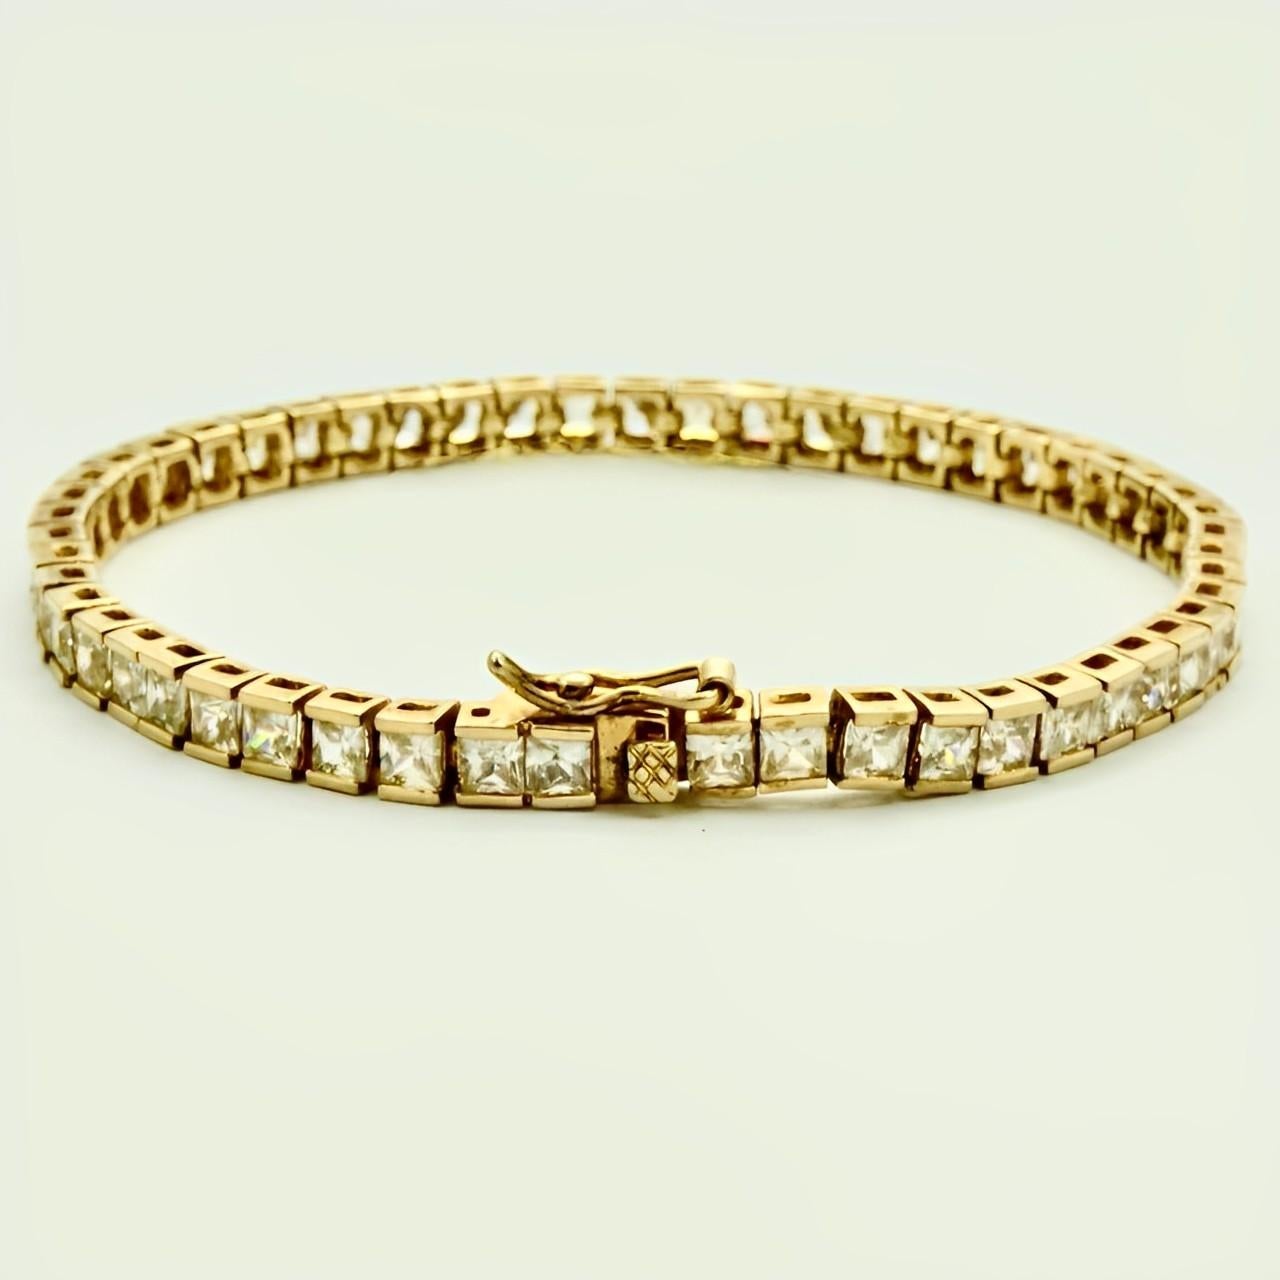 Beautiful gold vermeil on sterling silver tennis bracelet with a safety catch, set with clear faceted rhinestones in open back settings. Measuring length 18.8 cm / 7.4 inches by width 4 mm / .15 inch, and depth 3 mm / .11 inch.

This is a classic